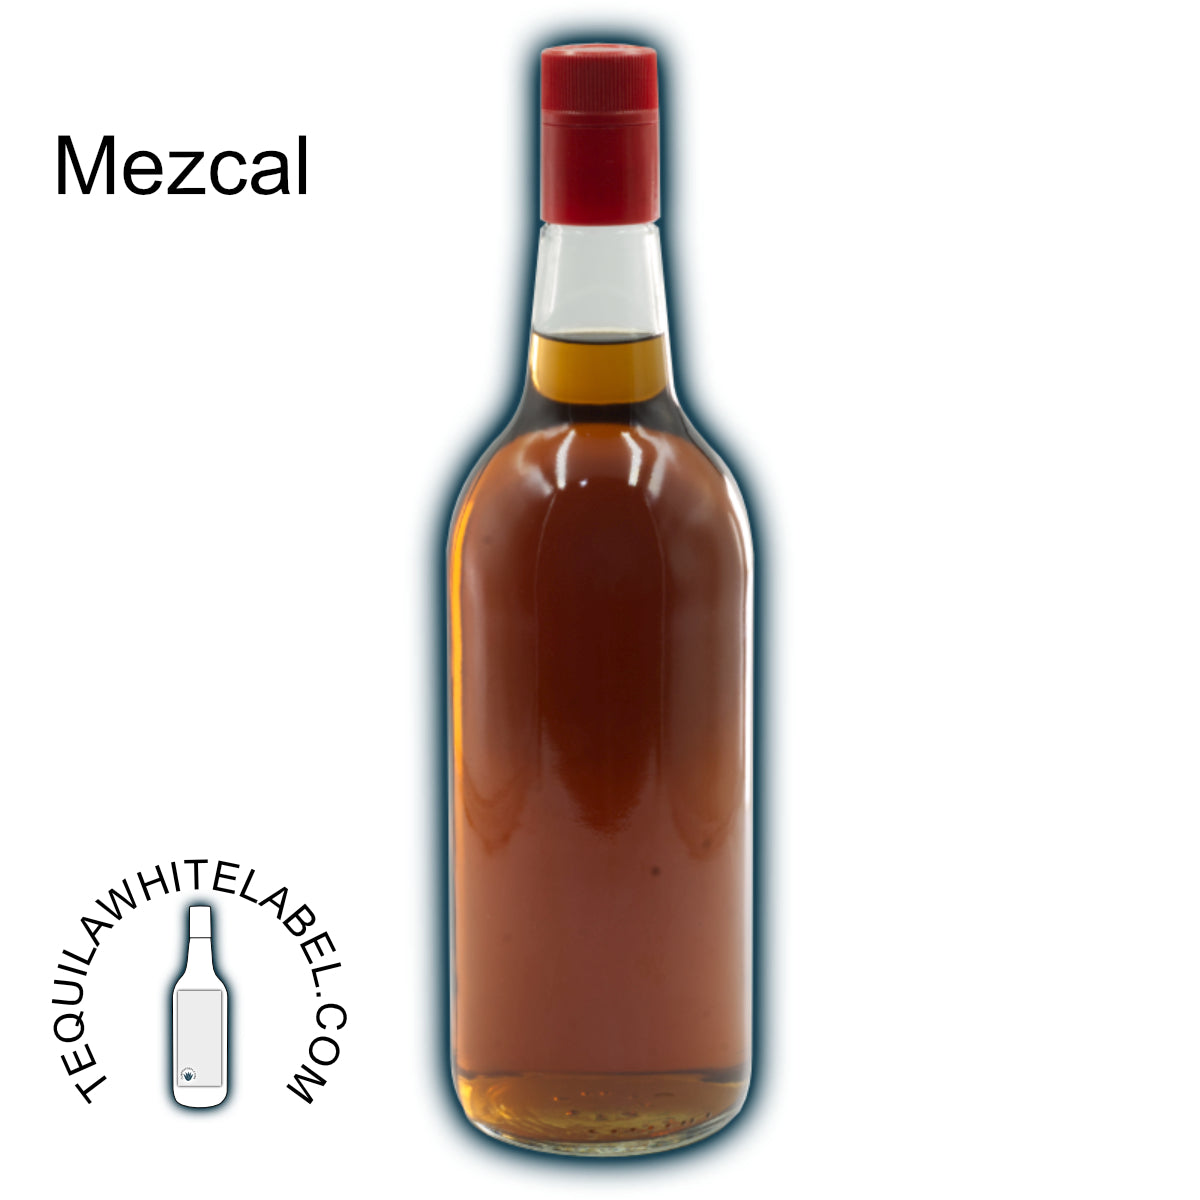 Original_ Premium Mezcal from Zacatecas: White, Reposado and Añejo, Available at CompraChelas and CompraTequila